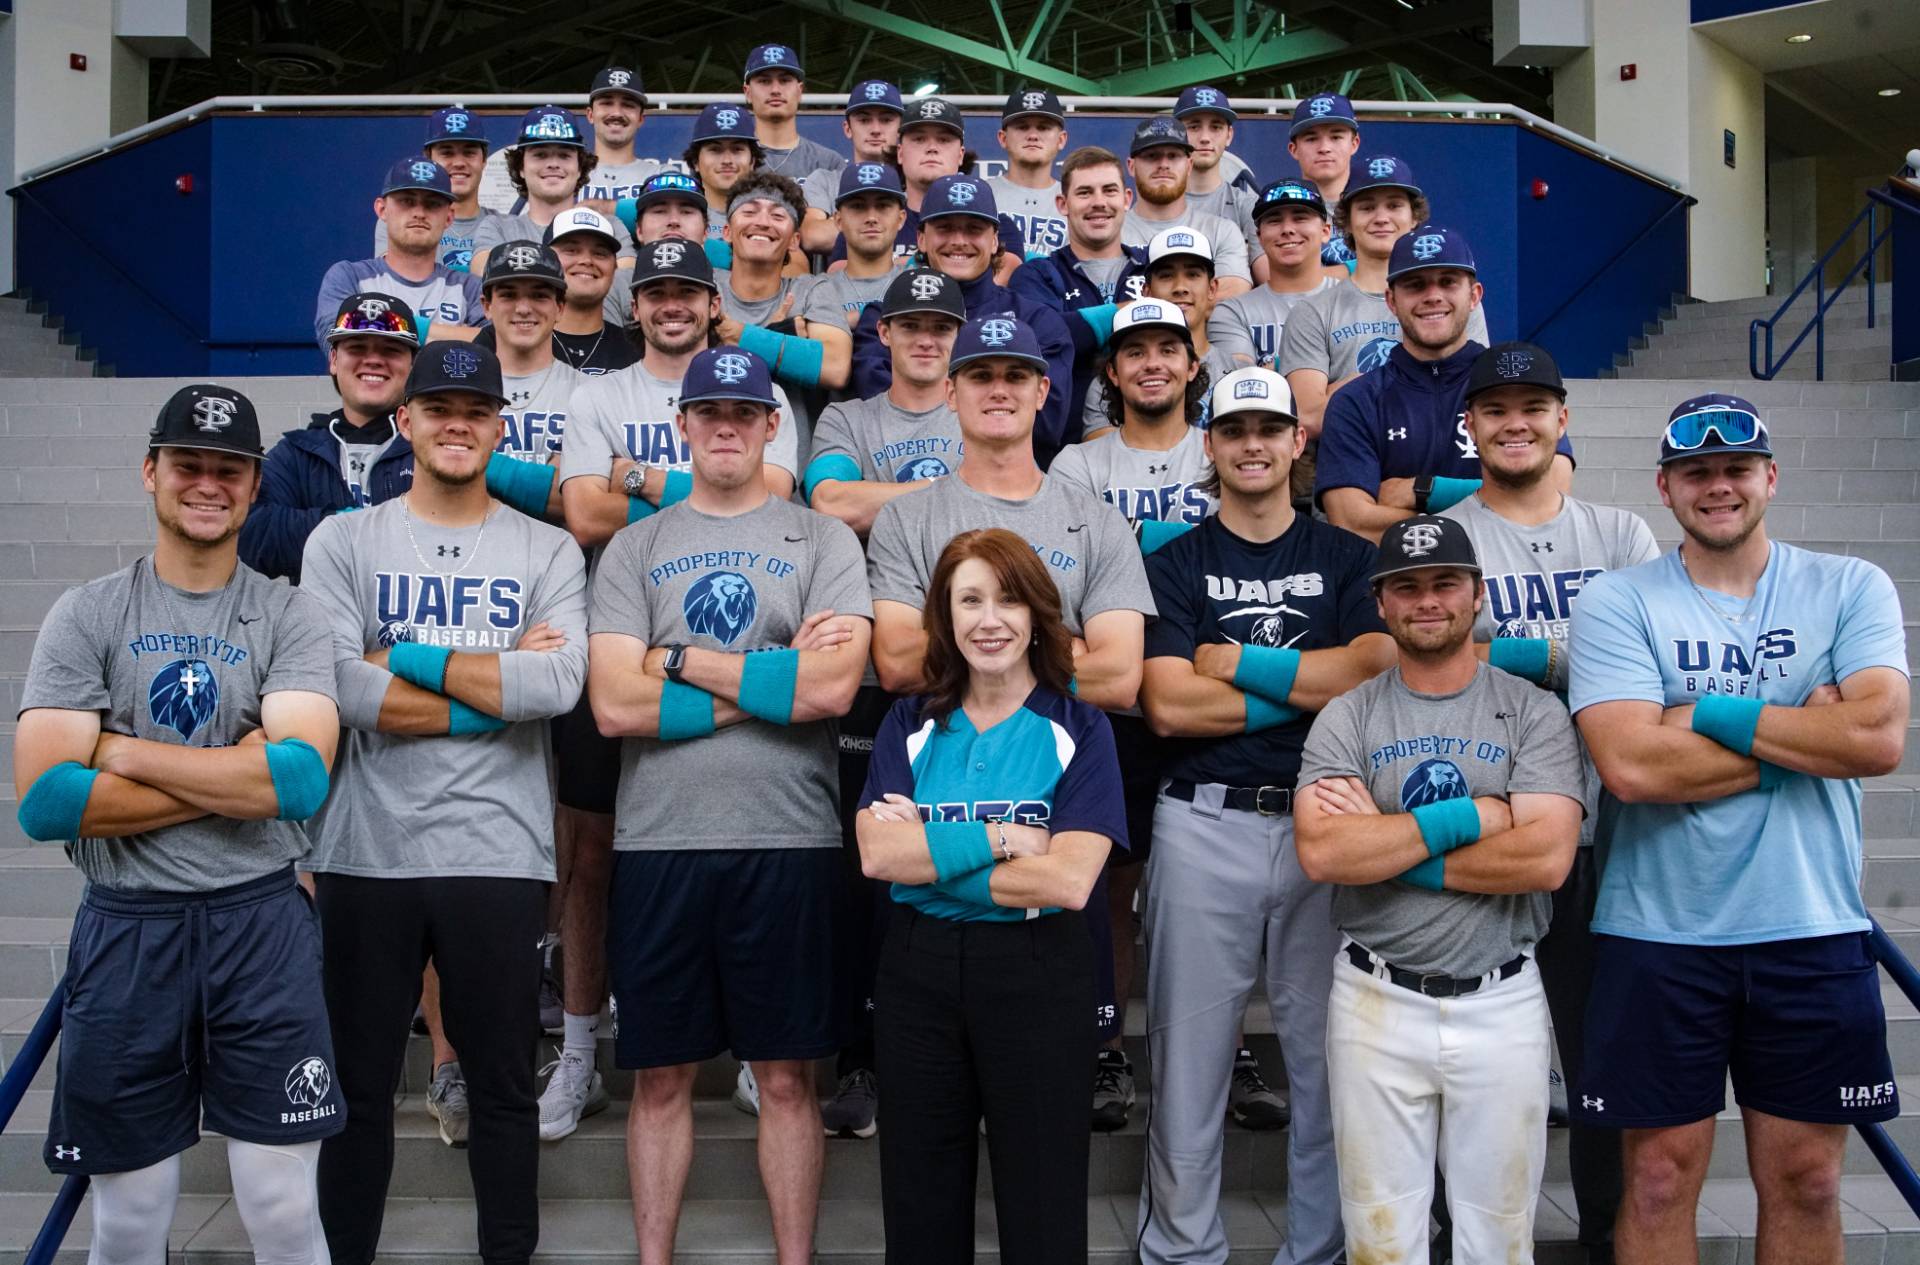 Chancellor Terisa Riley poses in a teal jersey honoring Sexual Assault Awareness Month with the UAFS Baseball team